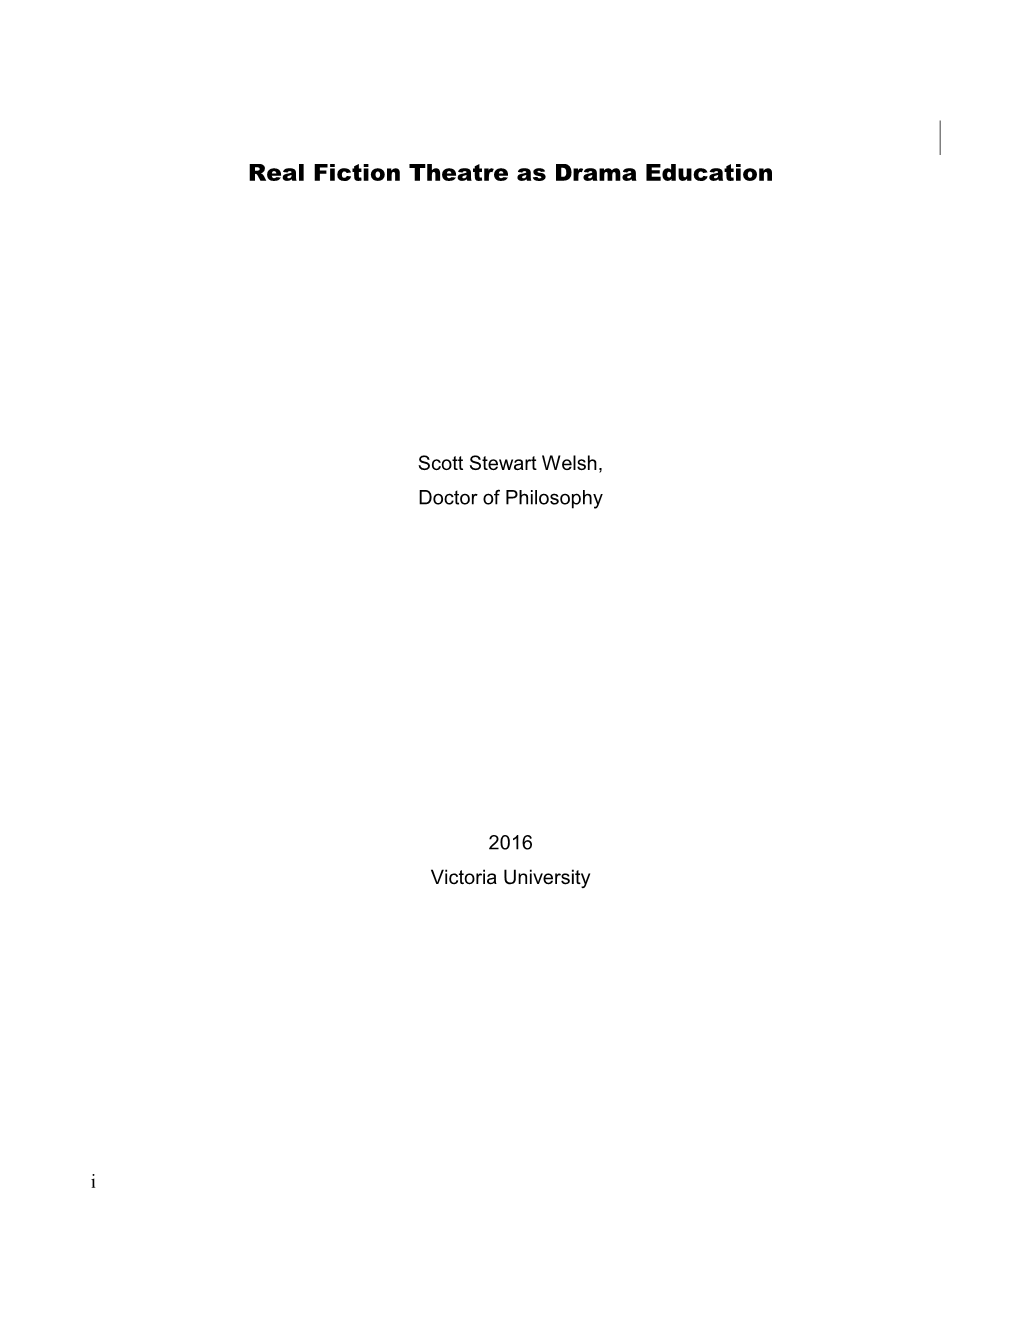 Real Fiction Theatre As Drama Education